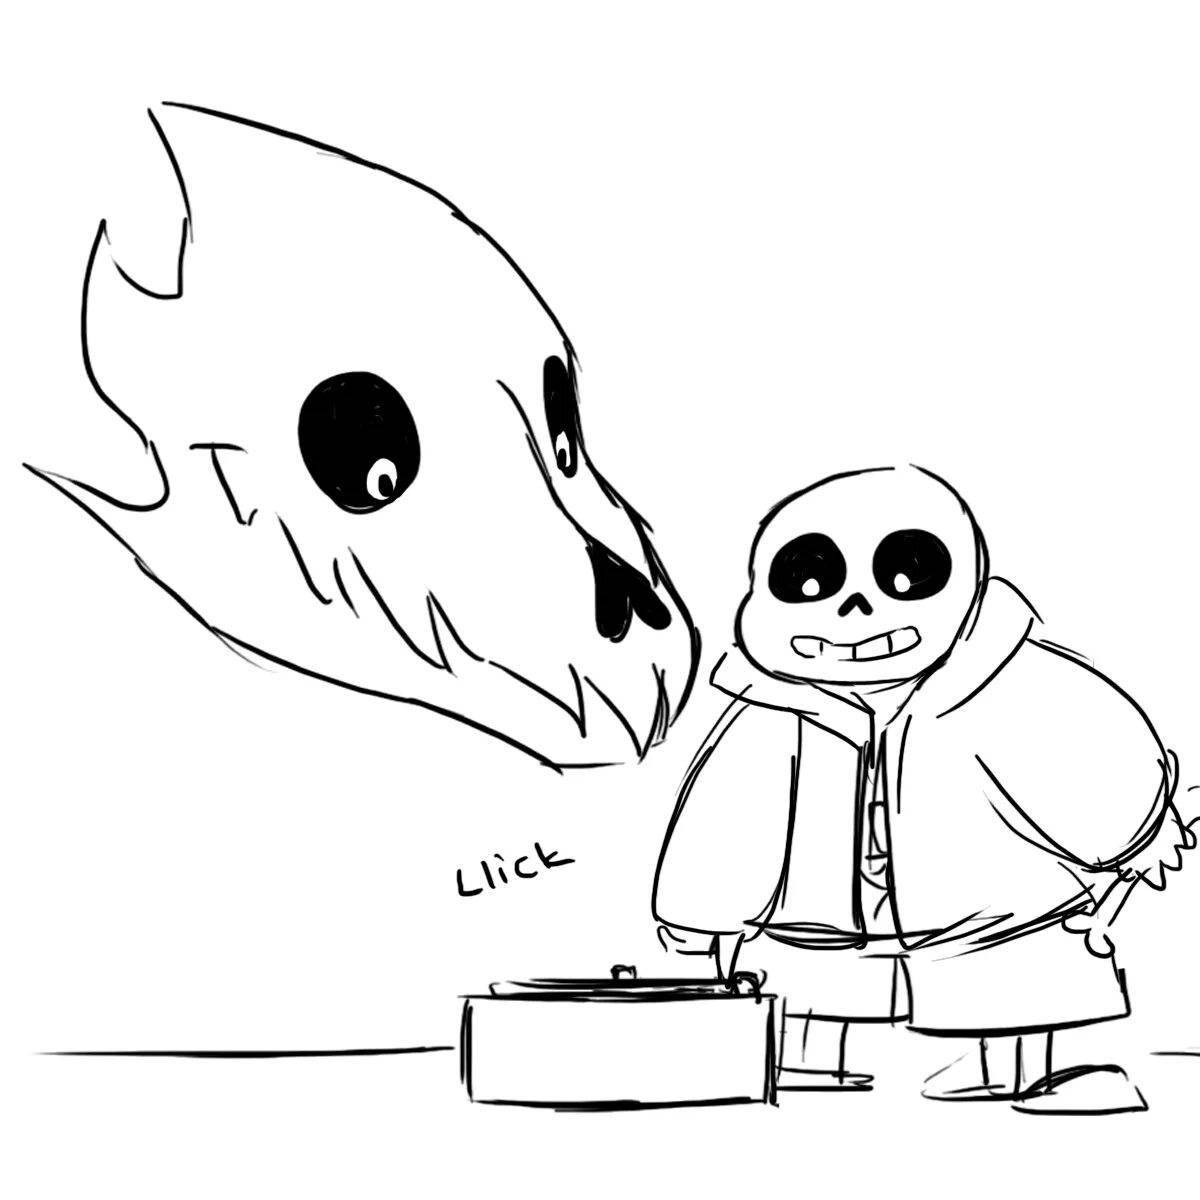 Colorful gaster coloring page